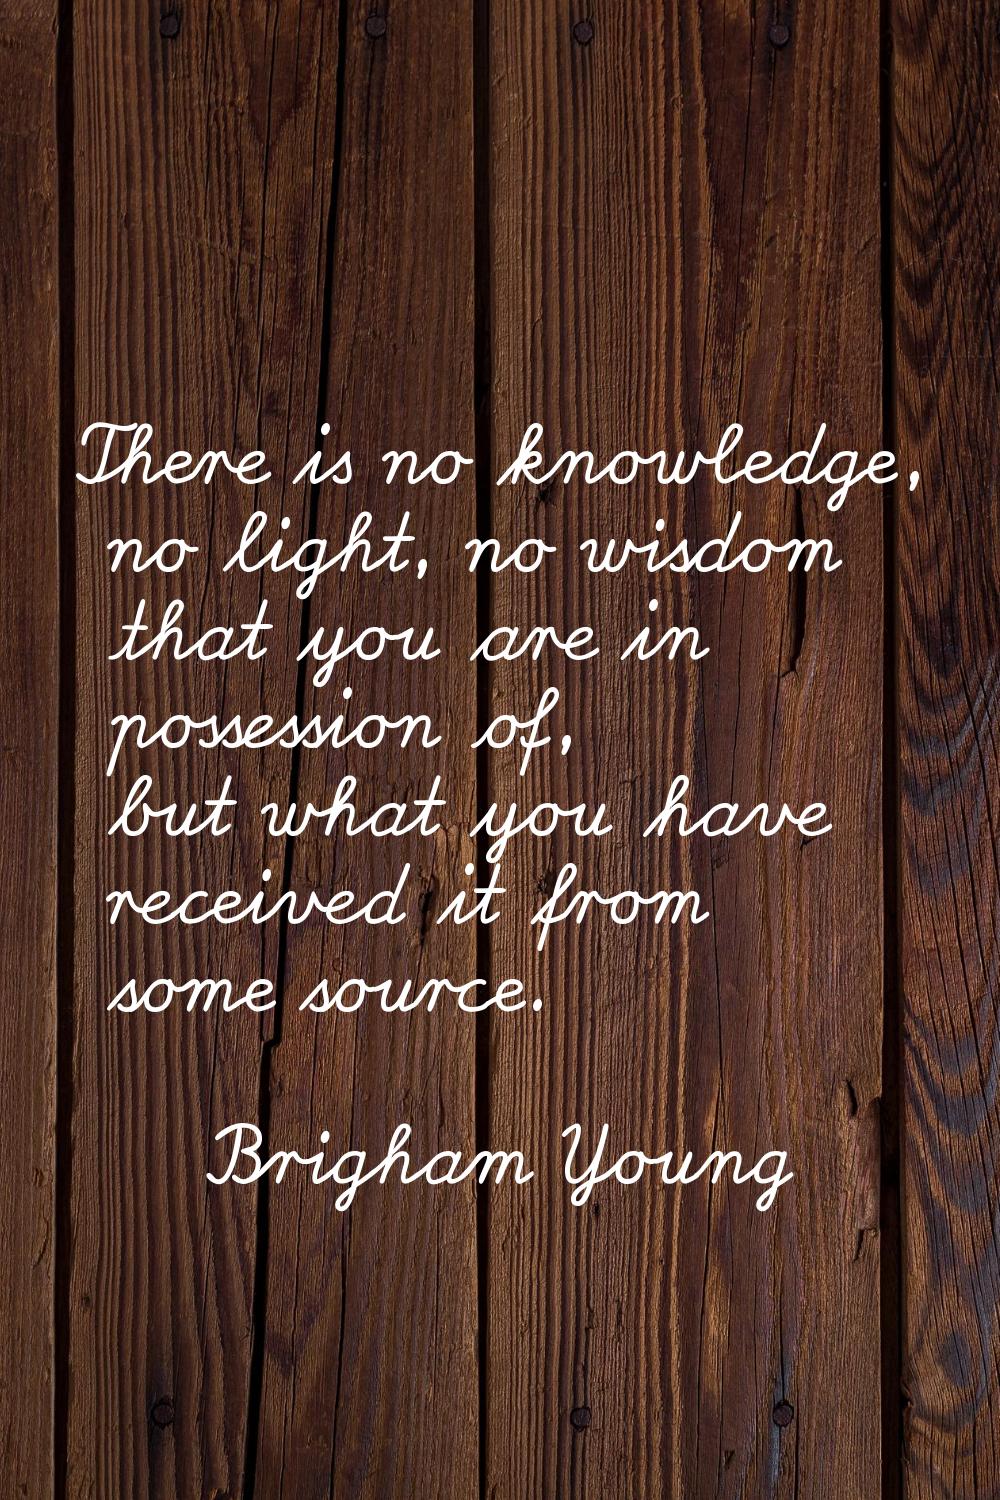 There is no knowledge, no light, no wisdom that you are in possession of, but what you have receive